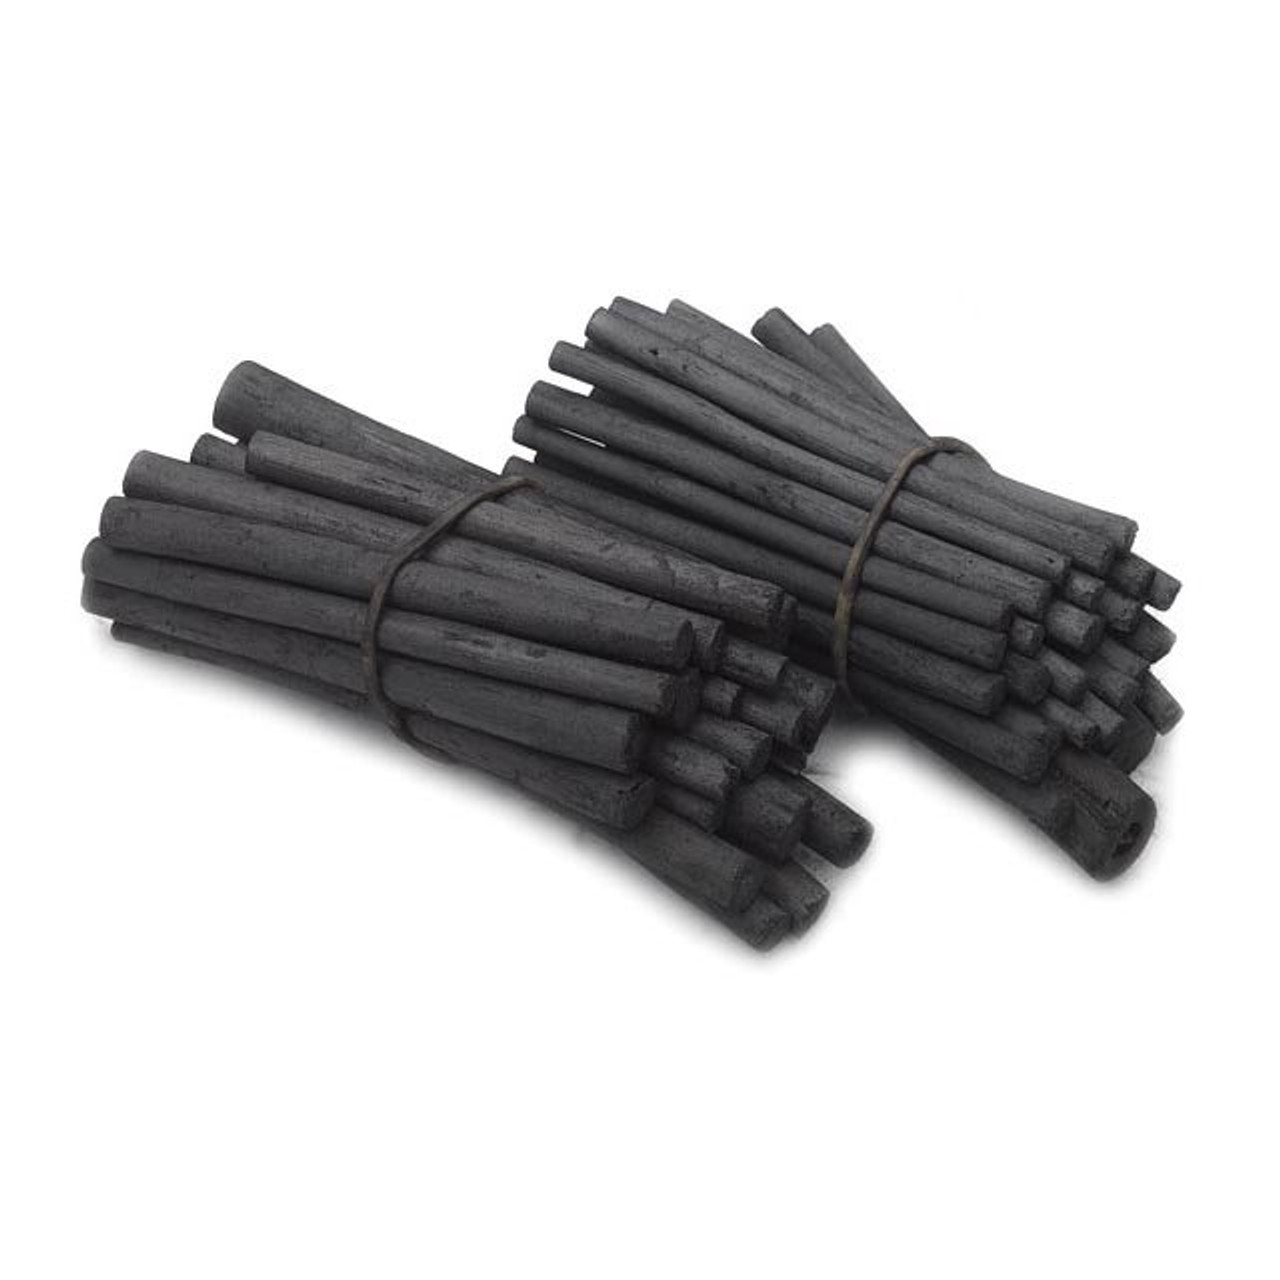  EXCEART 25Pcs Willow Charcoal pencils for students colorful  pencils color pencils students charcoal stick artist vine charcoal drawing  pencils artist pencils durable compressed charcoal : Arts, Crafts & Sewing